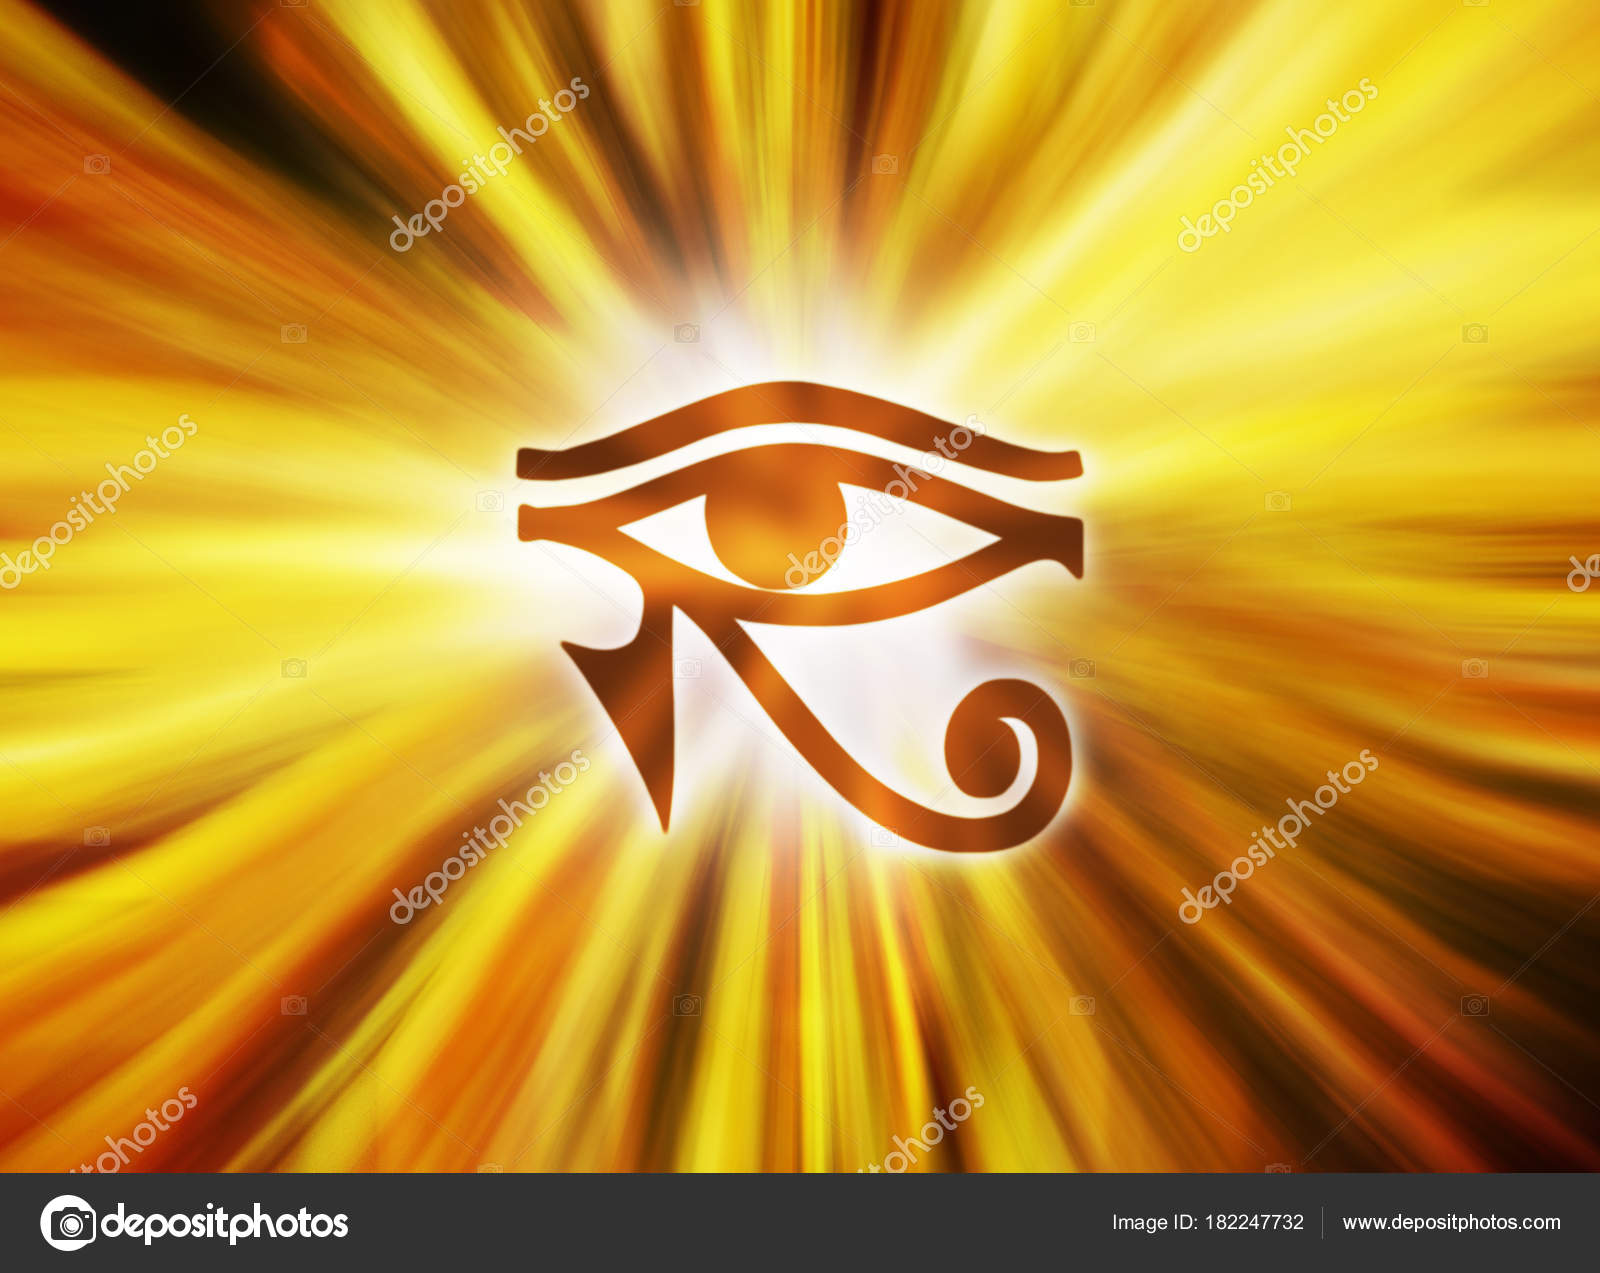 Eye Of Horus wallpaper by Parallax  Download on ZEDGE  9592